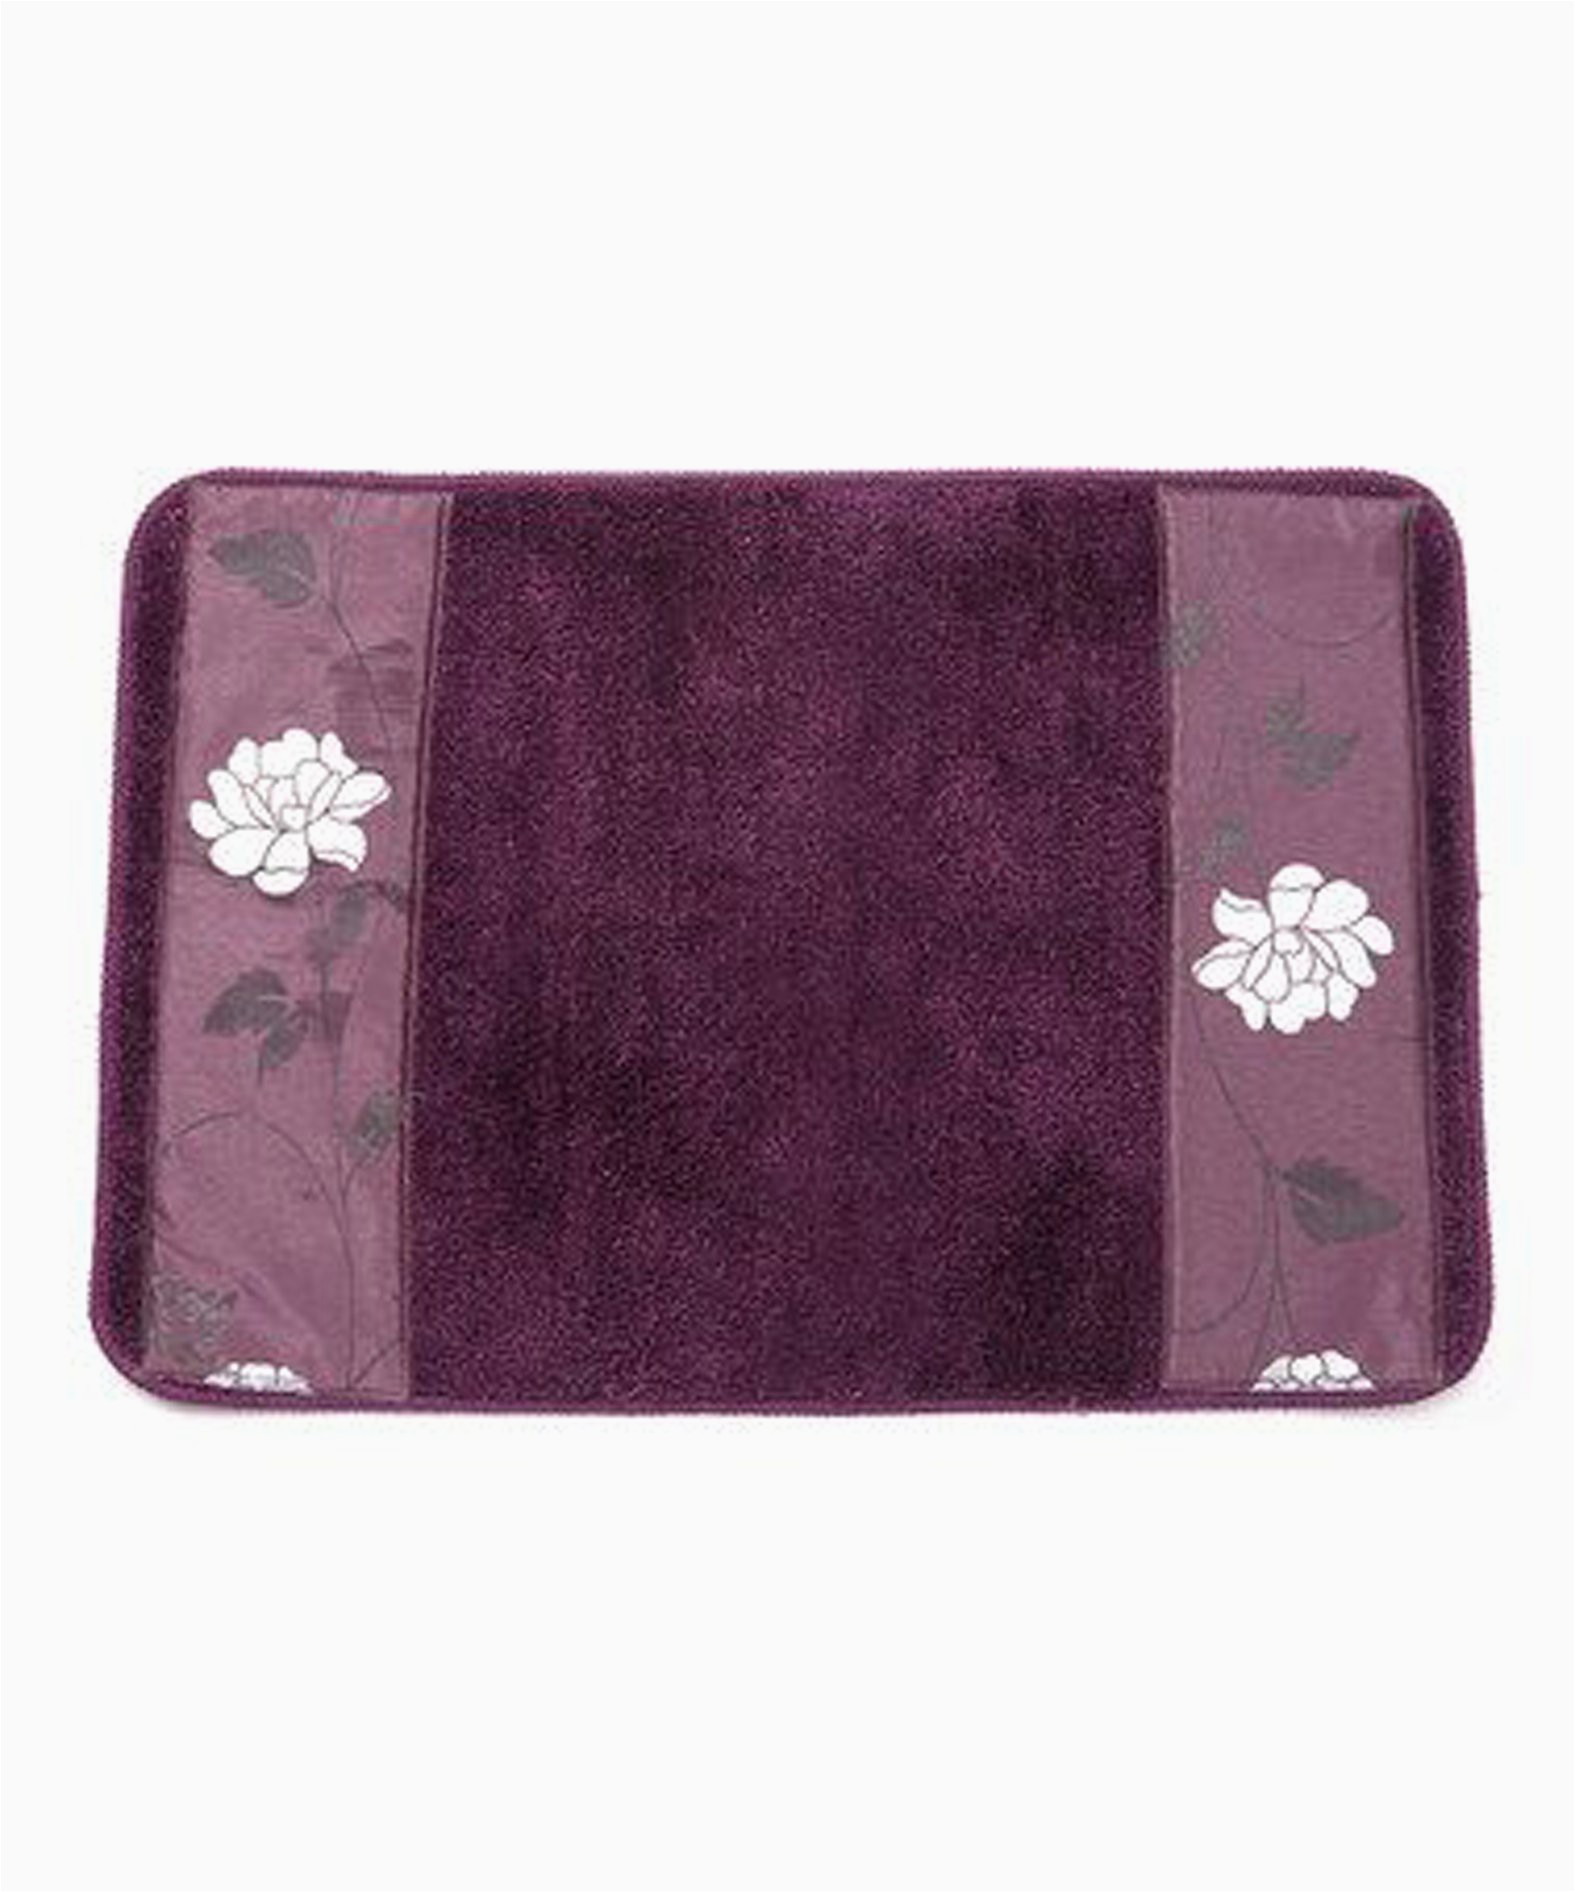 popular home the avanti collection banded bath rug purple 21 by 12 by 1